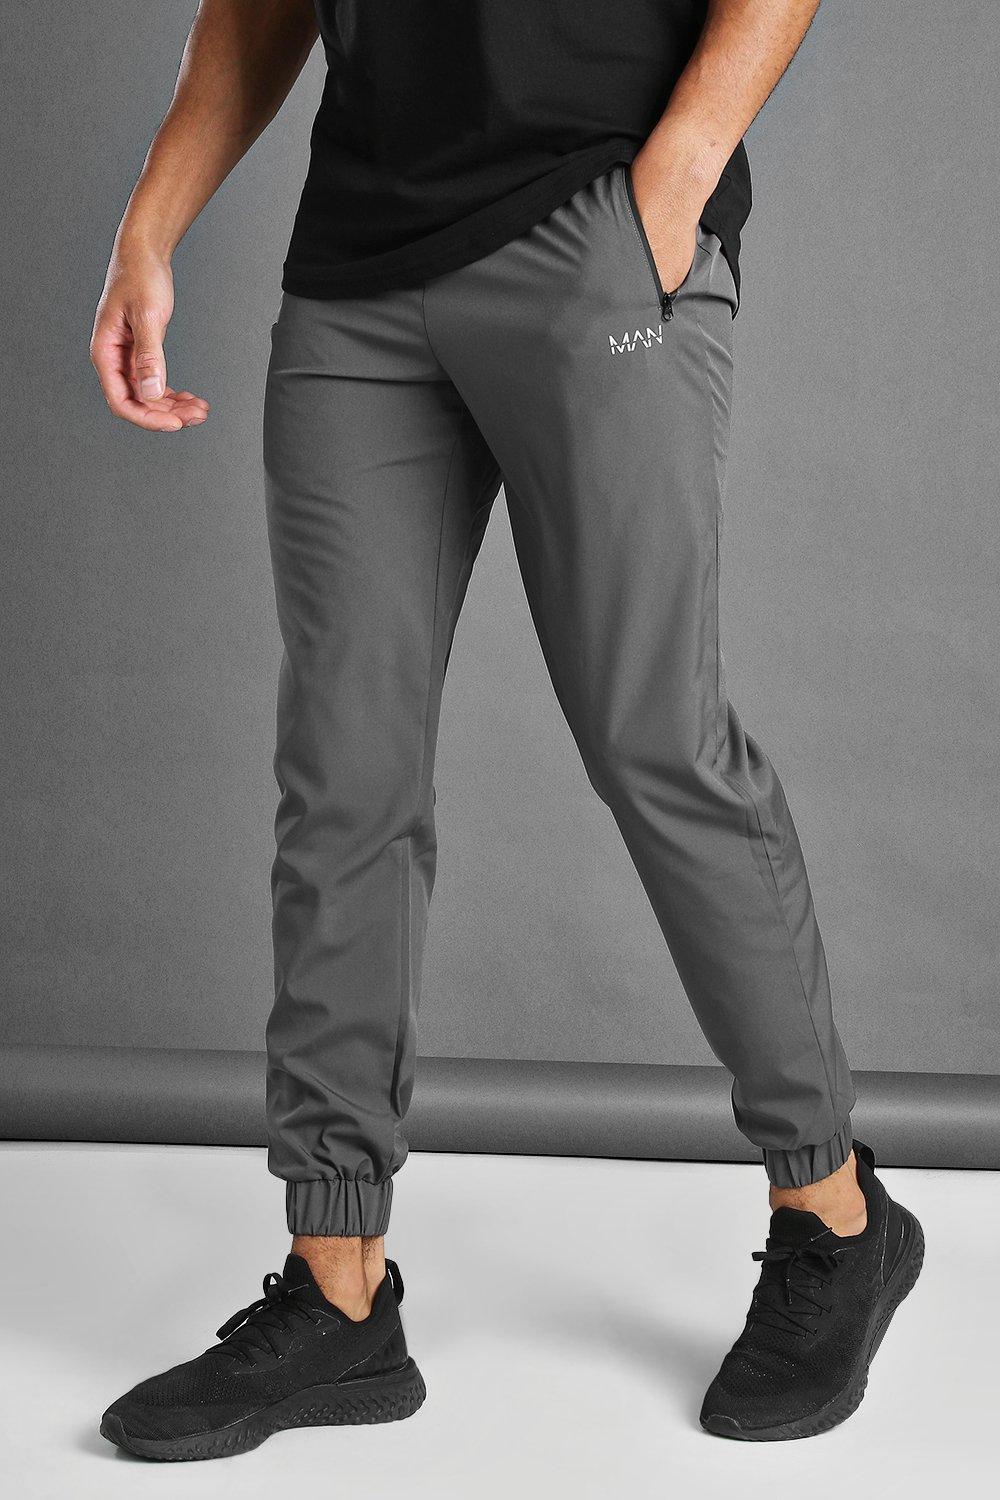 Women's Plus Size Modal Tapered Joggers - All in Motion Charcoal Gray 2X